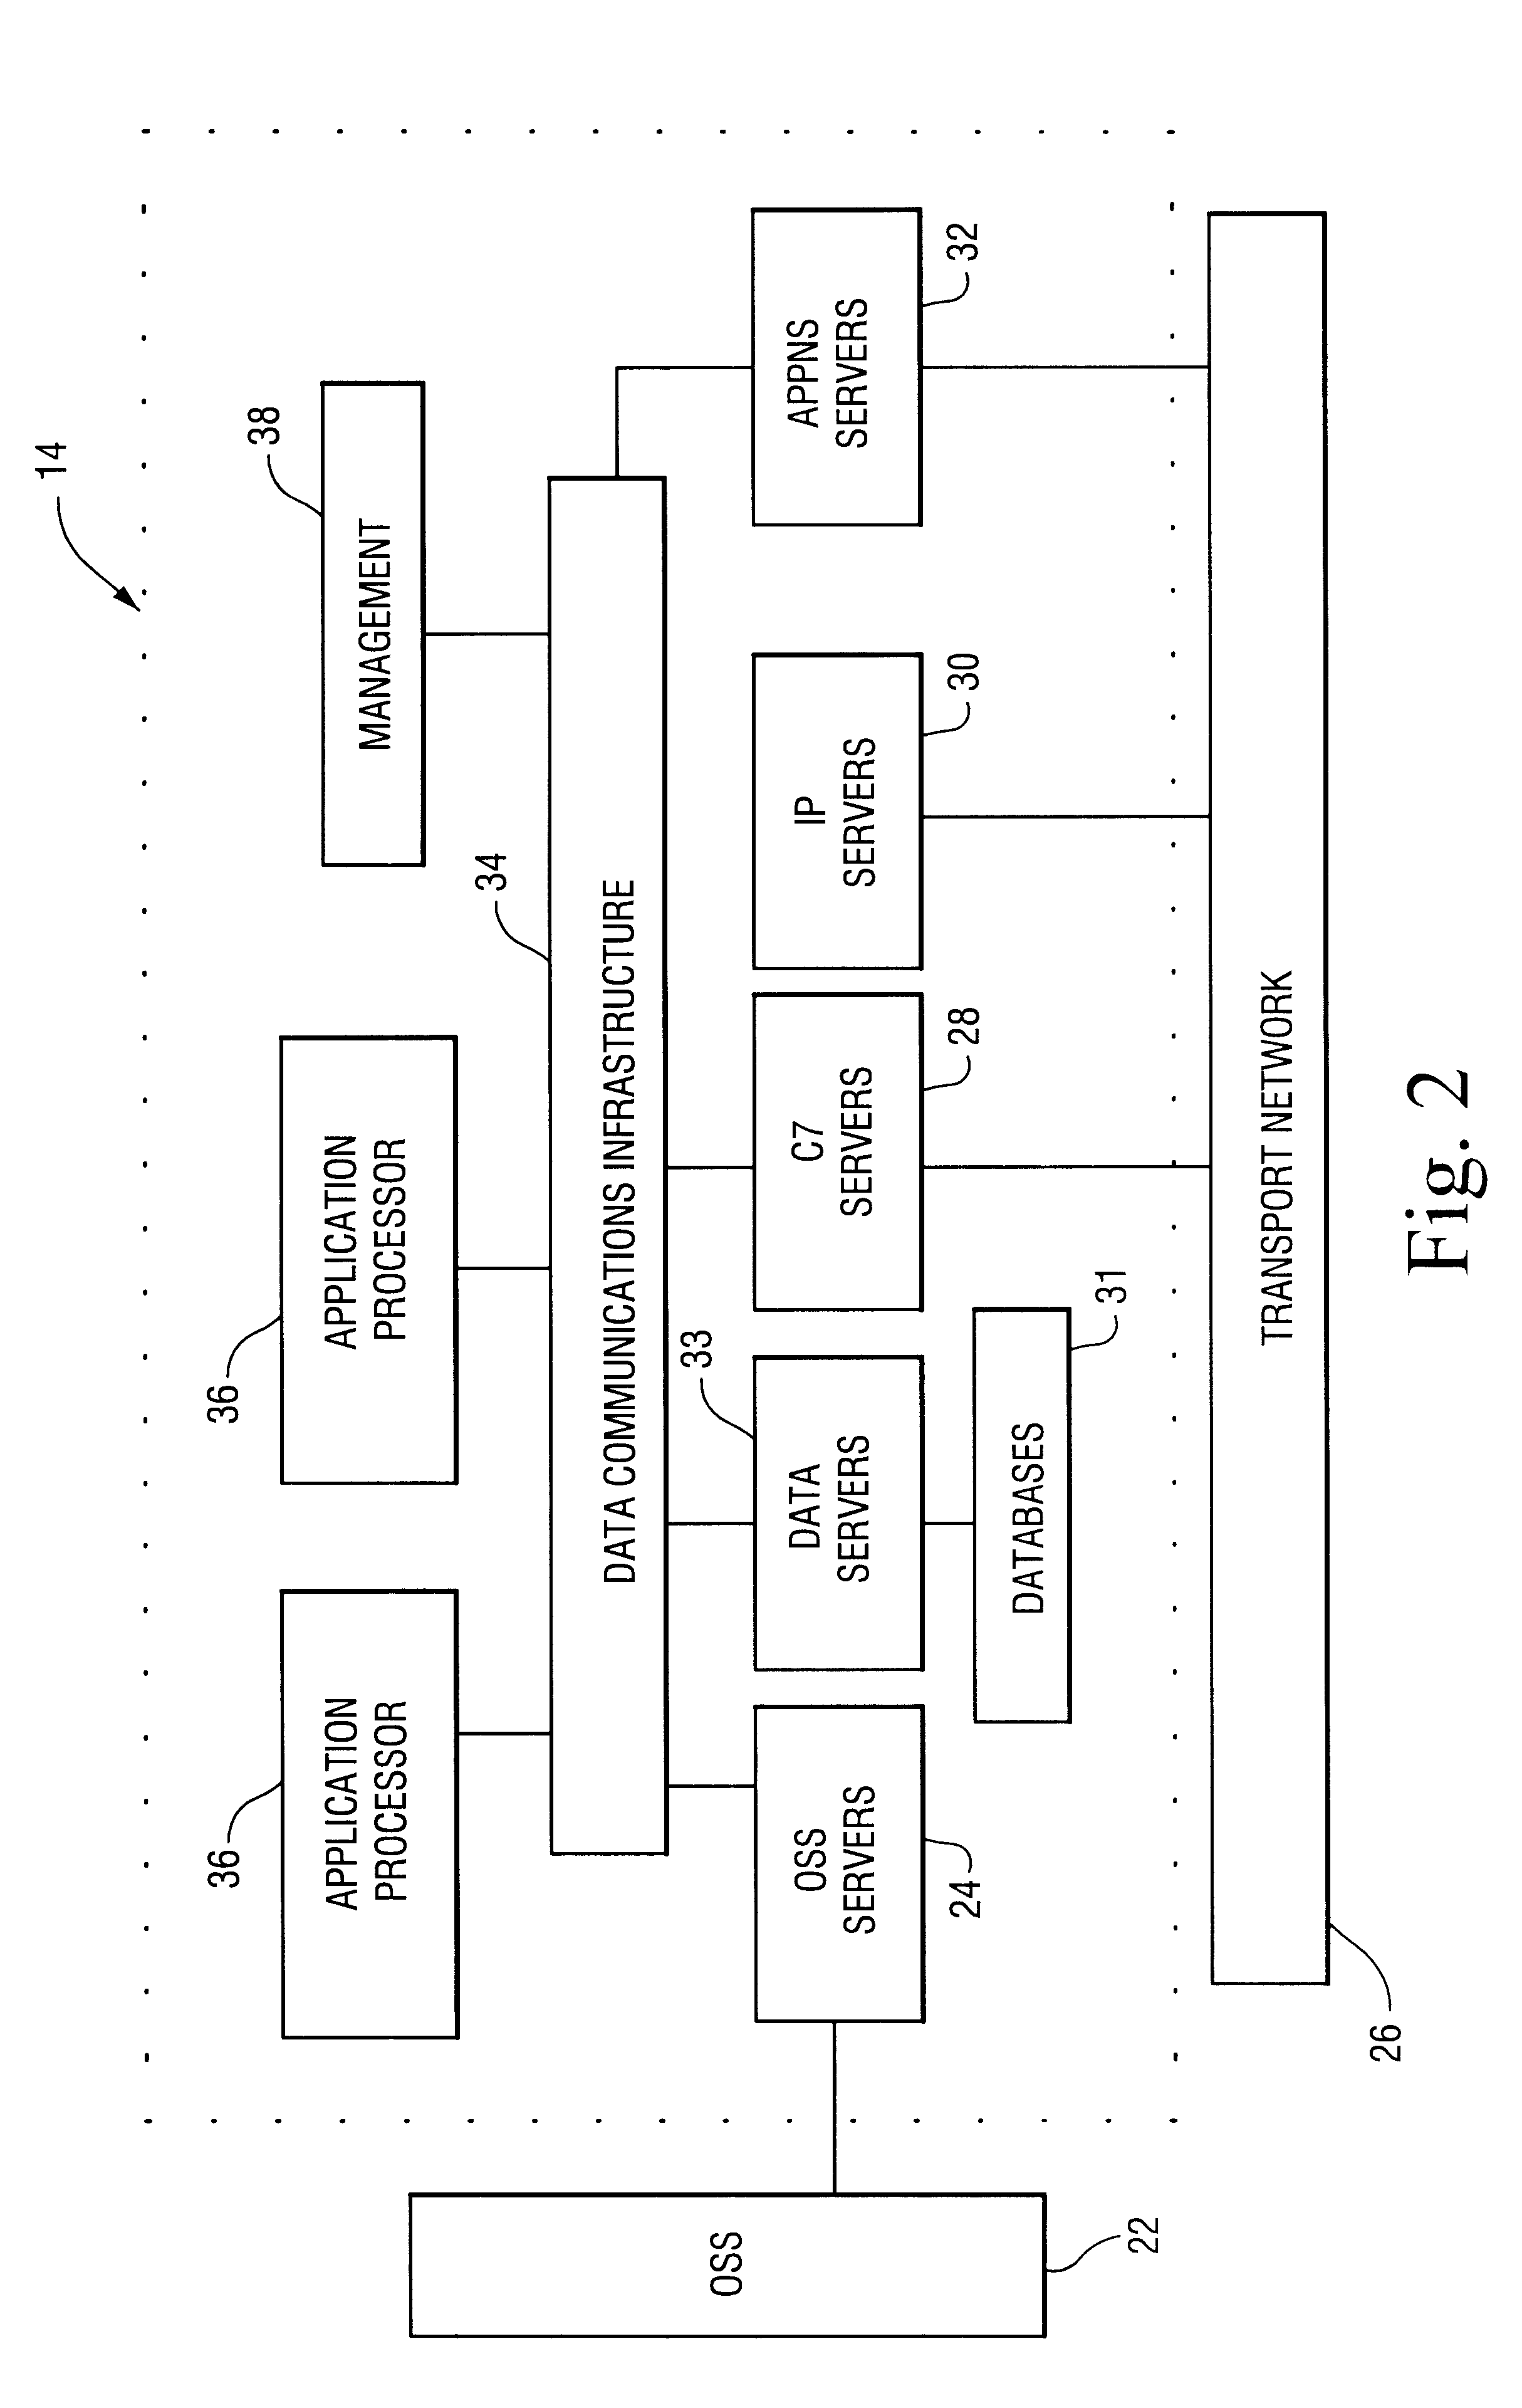 Intelligent network with distributed service control function